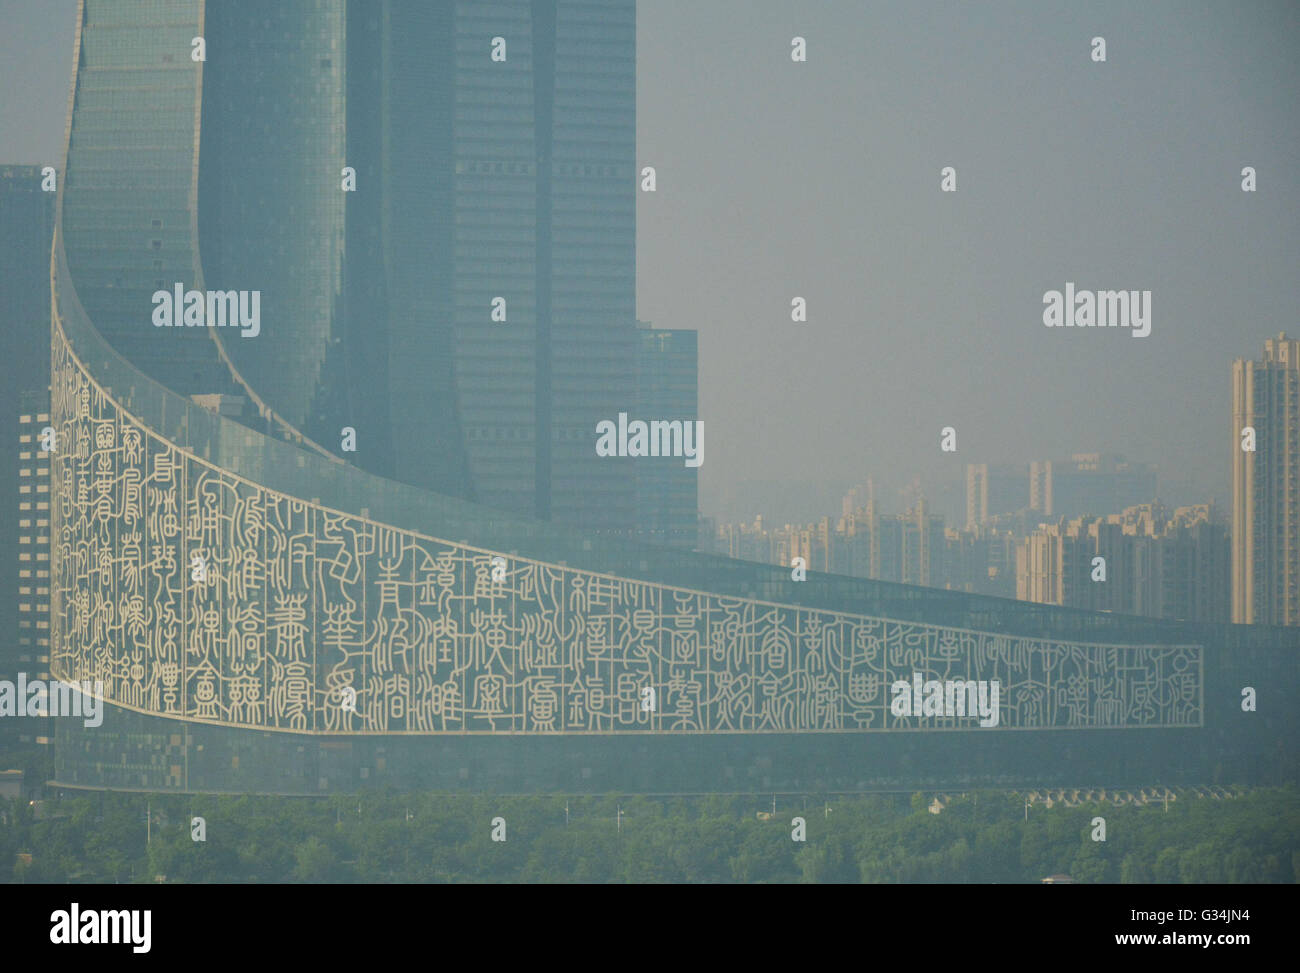 Hefei, Hefei, CHN. 4th June, 2016. Hefei, China - June 4 2016: (EDITORIAL USE ONLY. CHINA OUT) A building in Hefei is covered with seal characters, showing the names of cities, rivers, lakes and mountains in Anhui. Seal character is a kind of Ancient Chinese Character a thousand of years ago. © SIPA Asia/ZUMA Wire/Alamy Live News Stock Photo